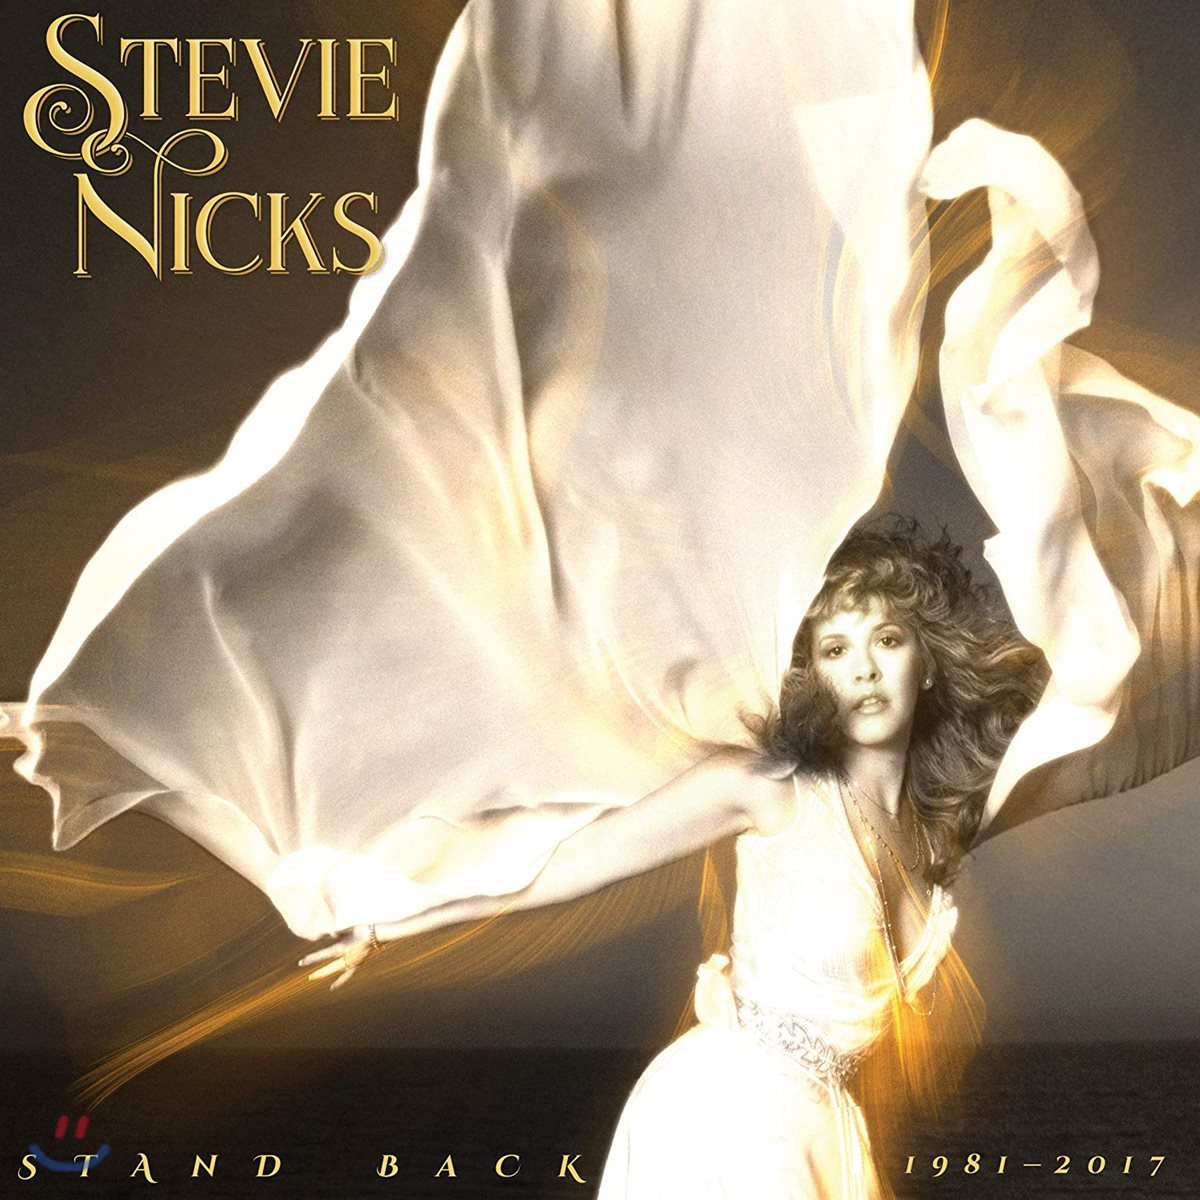 Stevie Nicks (스티비 닉스) - Stand Back: 1981-2017 (Deluxe Edition)